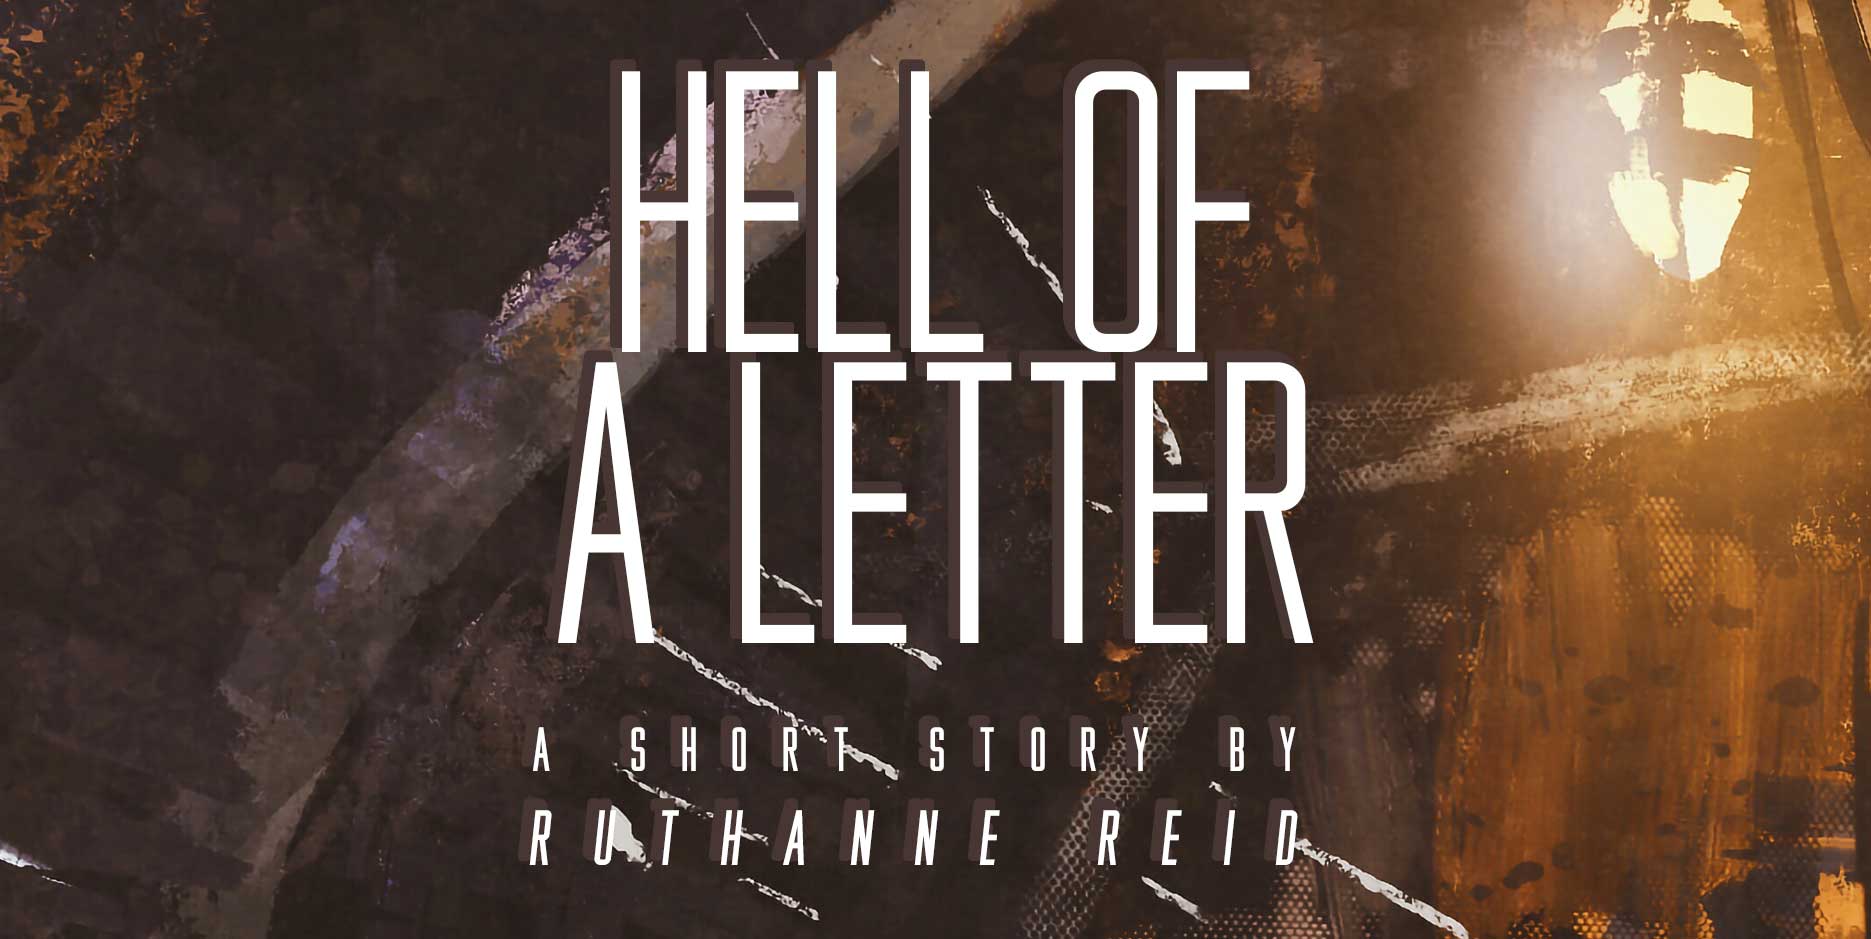 Hell of a Letter: a short story by Ruthanne Reid